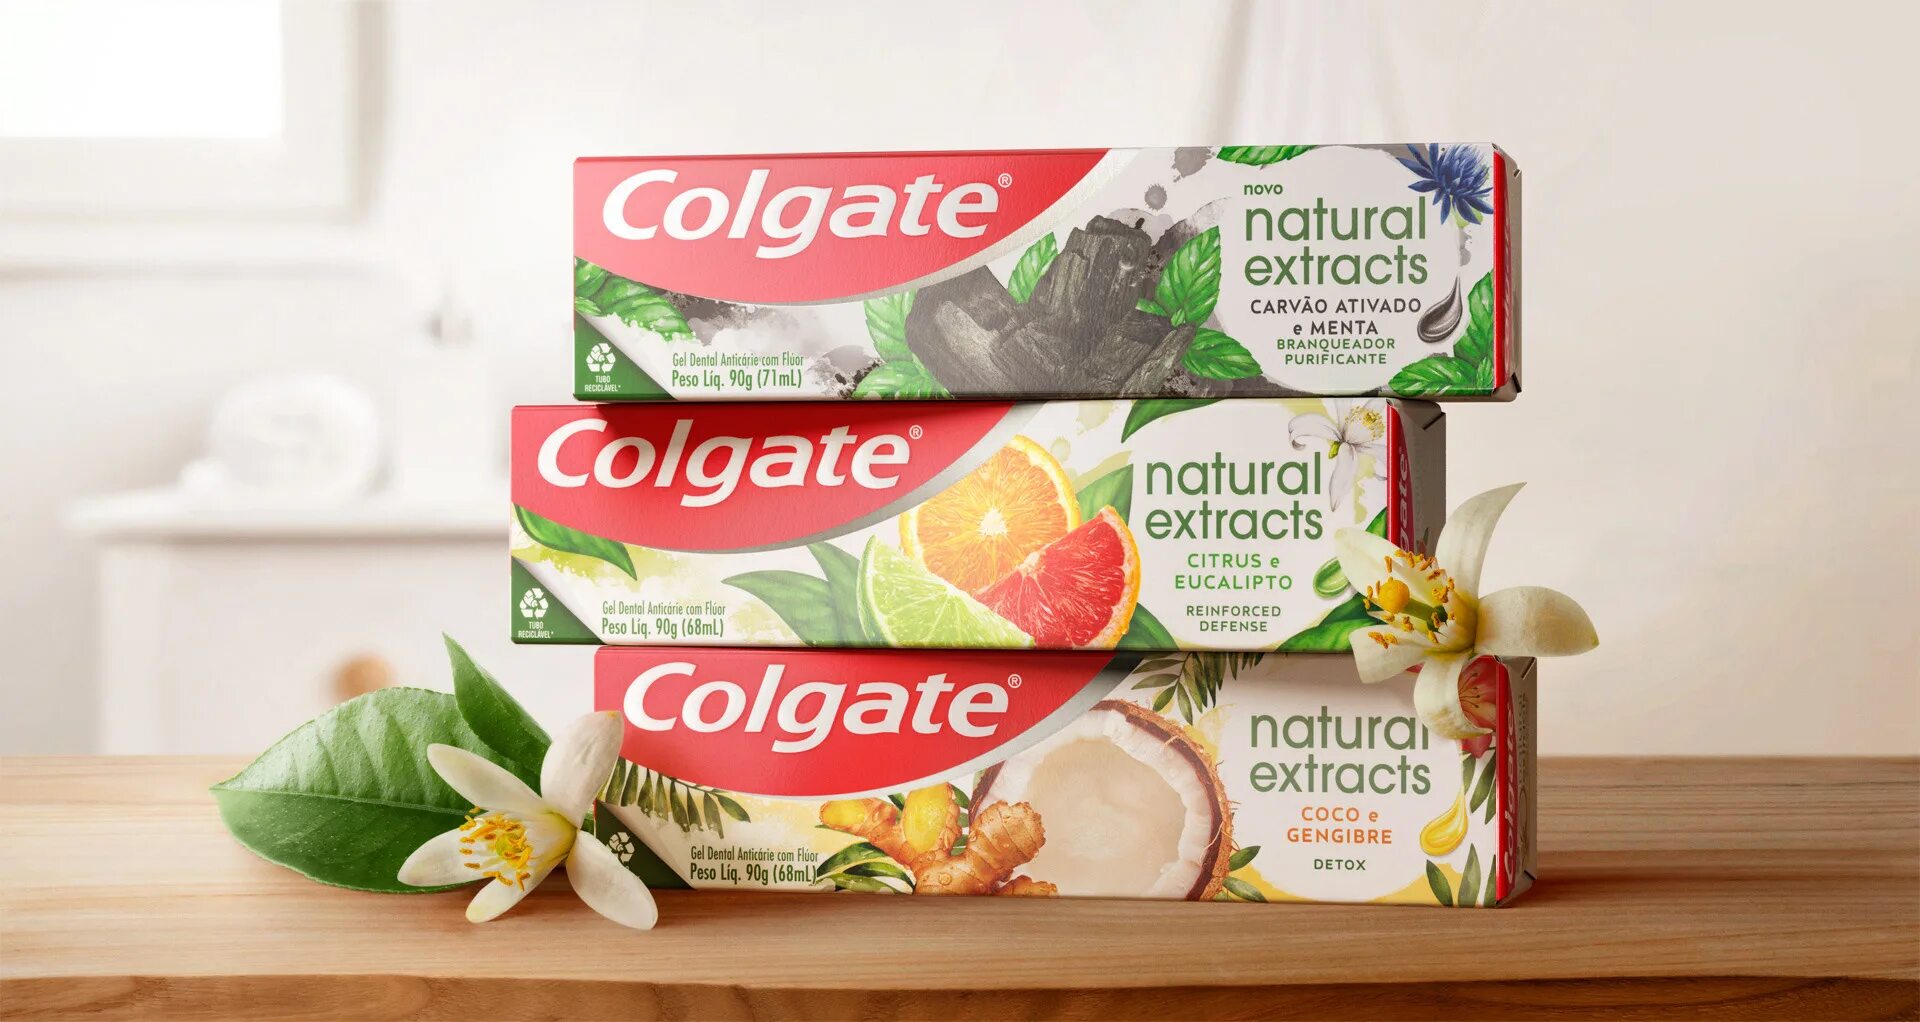 Natural extracts. Реклама Колгейт с яйцом. Colgate package. Реклама зубной пасты Колгейт. Colgate Toothpaste package.